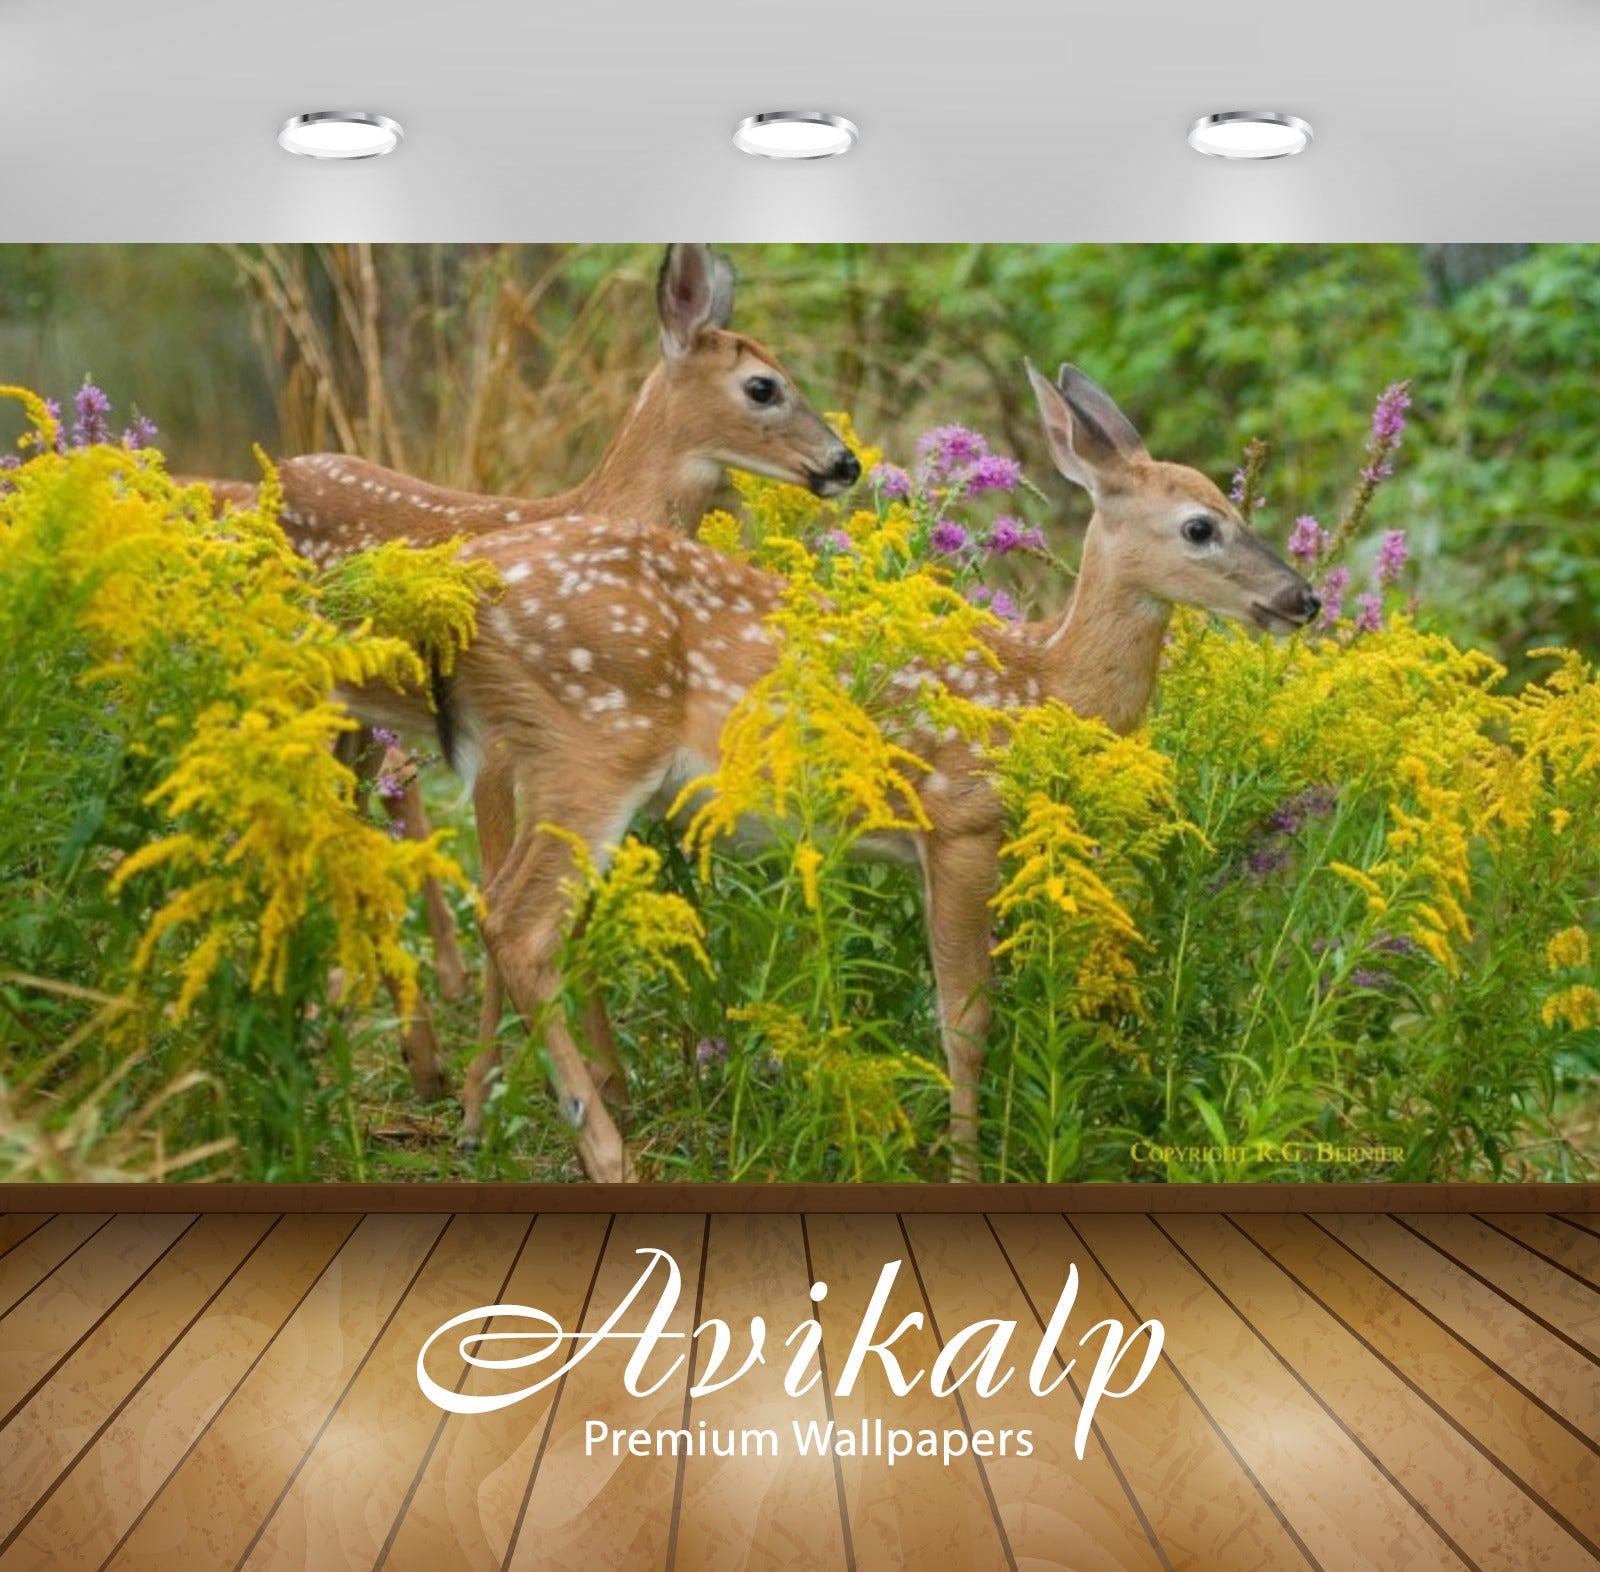 Avikalp Exclusive Awi2617 Fawns Full HD Wallpapers for Living room, Hall, Kids Room, Kitchen, TV Bac